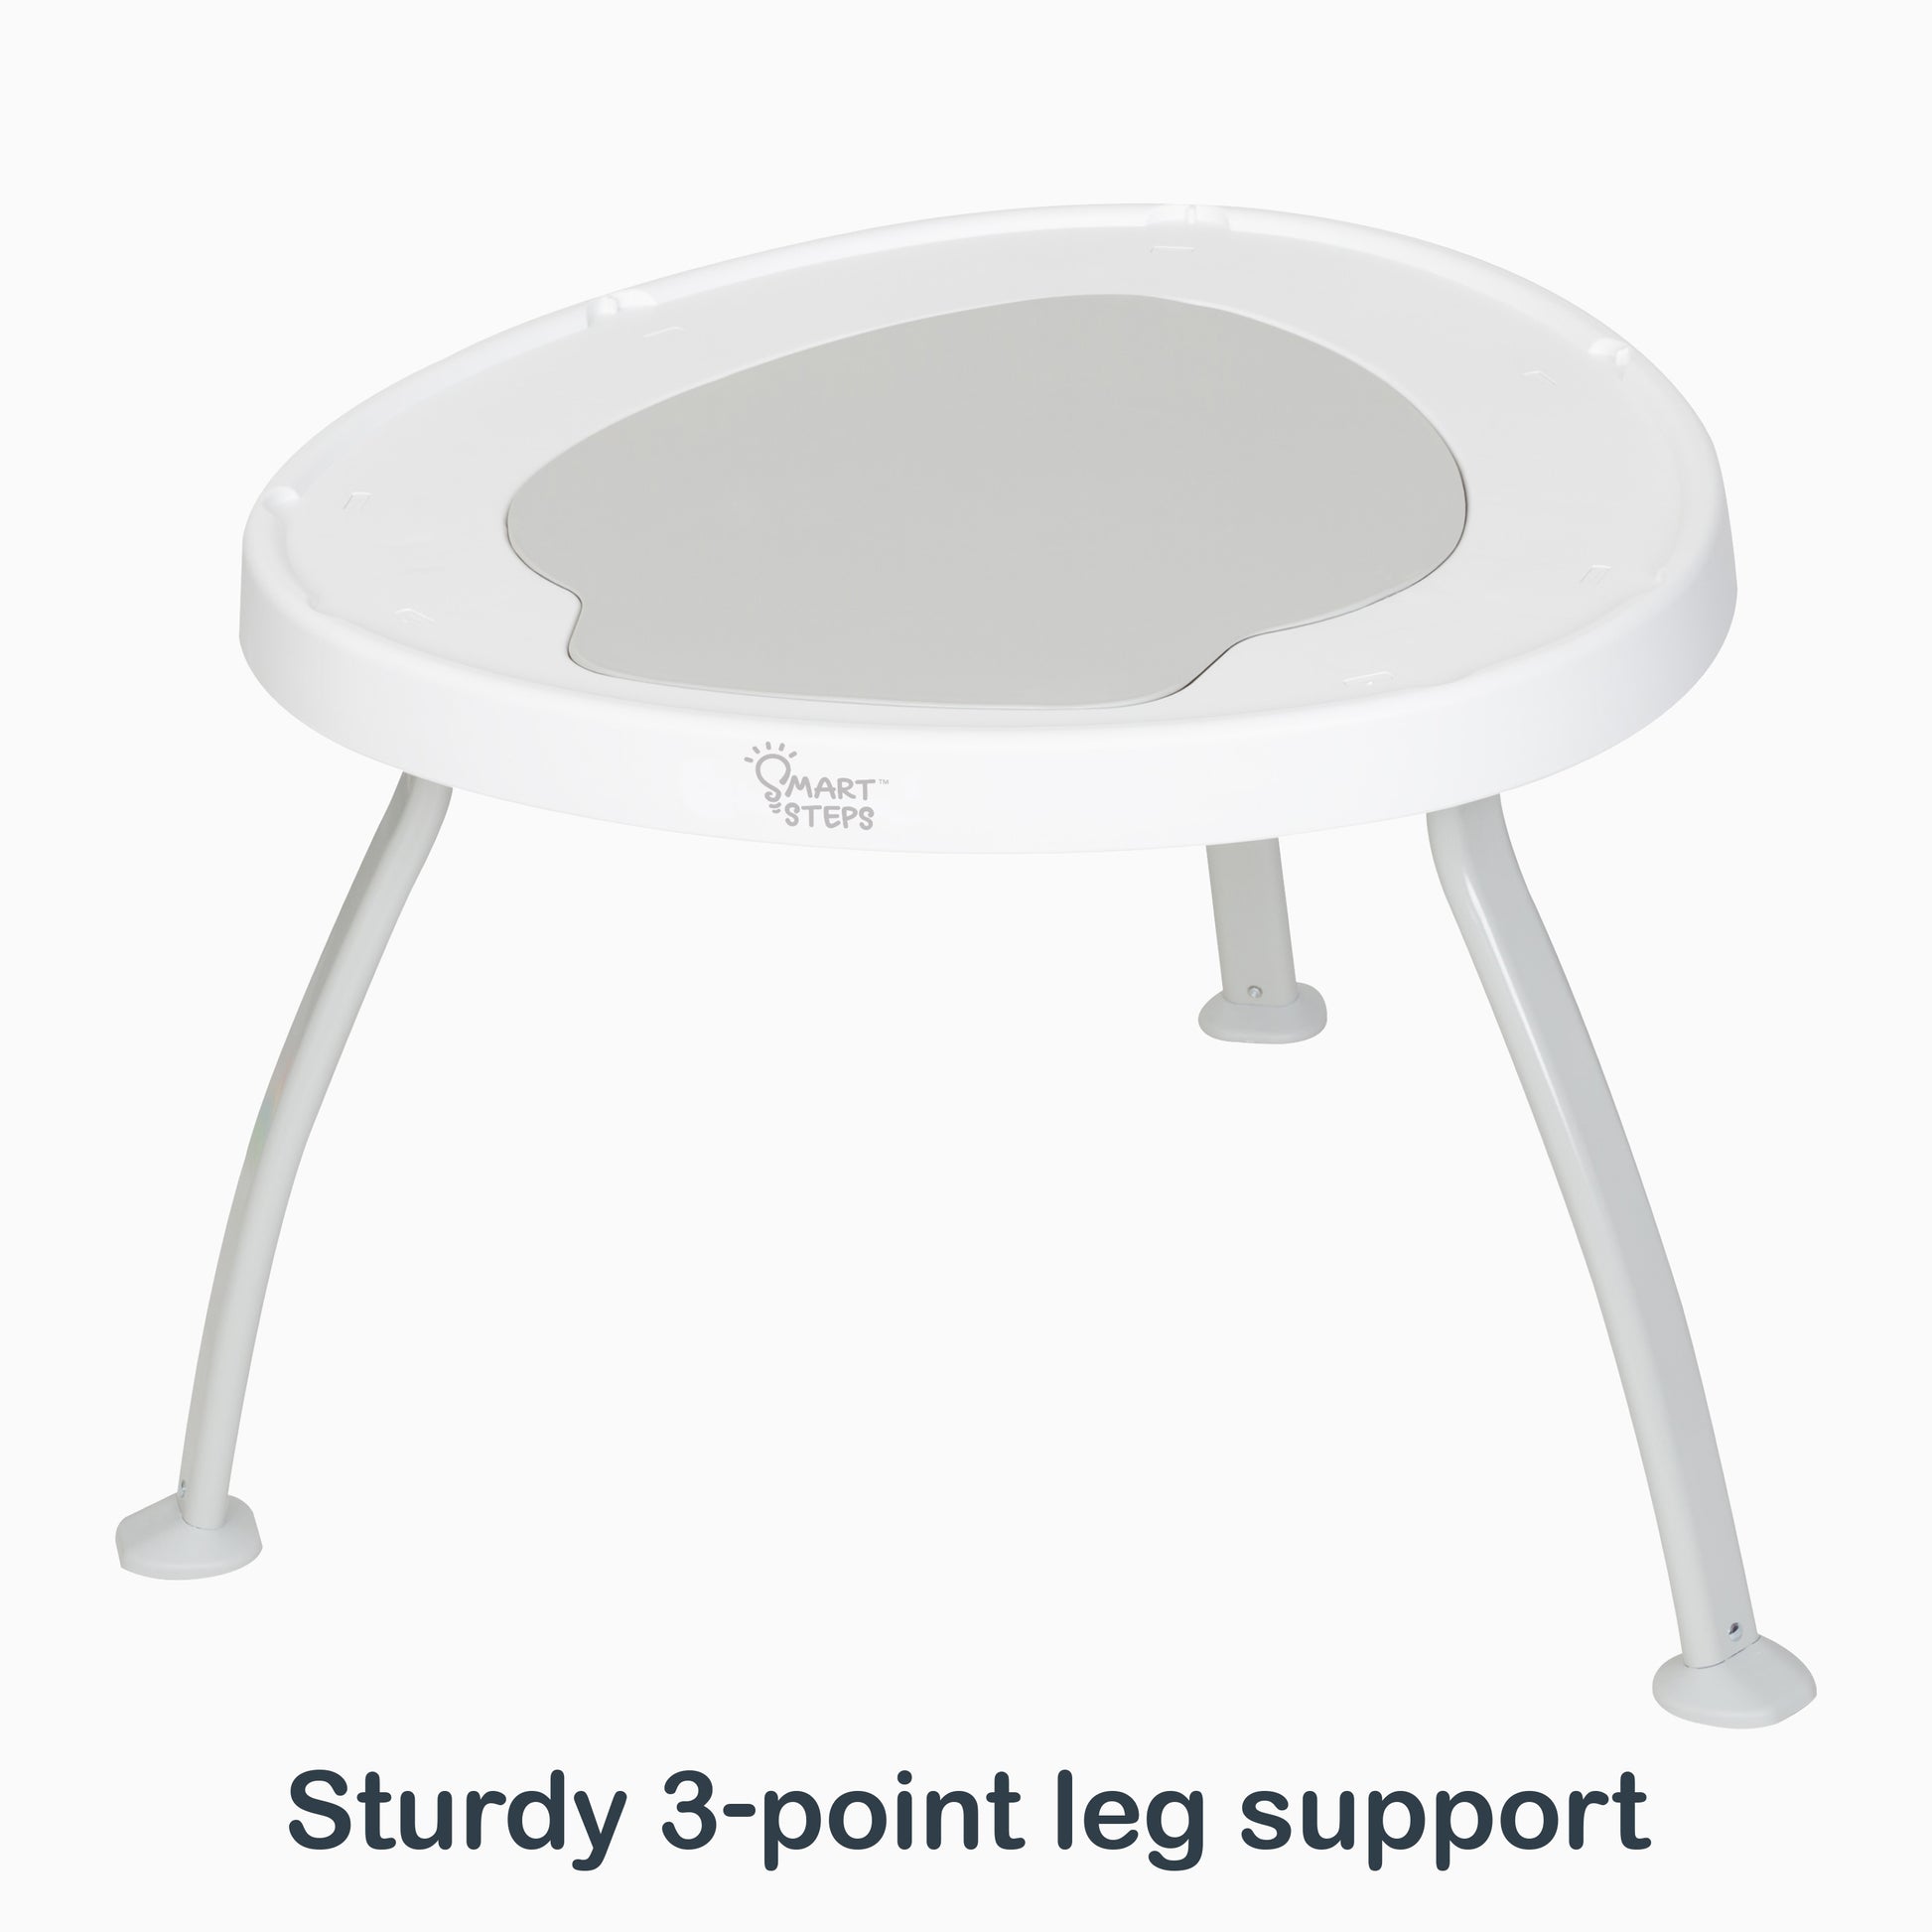 Smart Steps by Baby Trend Bounce N’ Play 3-in-1 Activity Center has sturdy 3-point leg support